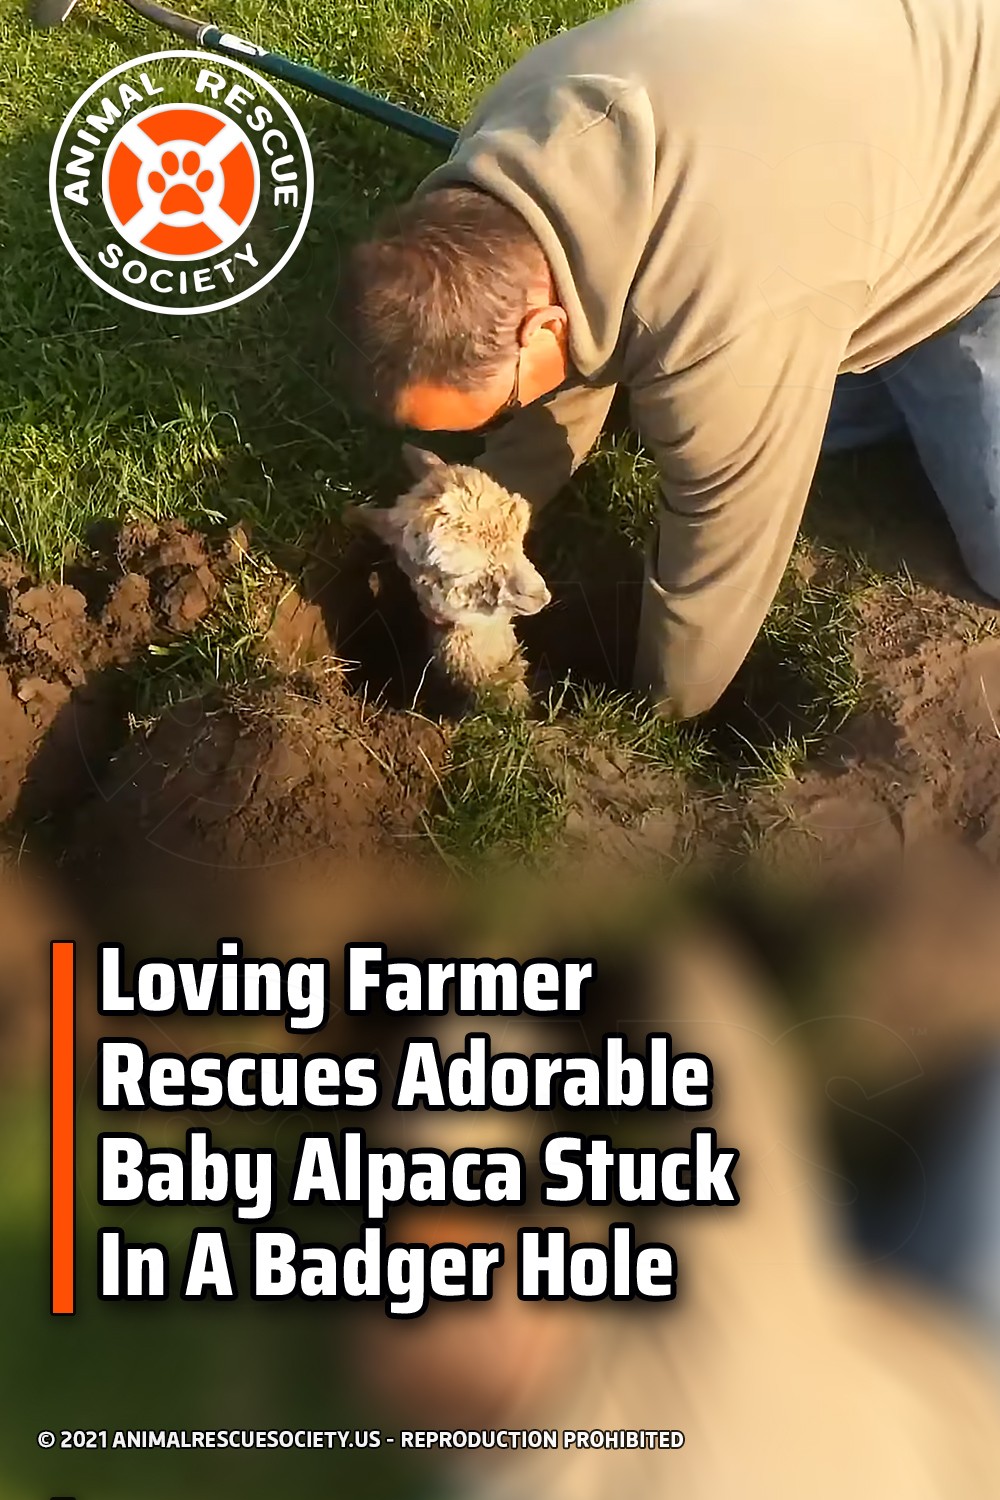 Loving Farmer Rescues Adorable Baby Alpaca Stuck In A Badger Hole